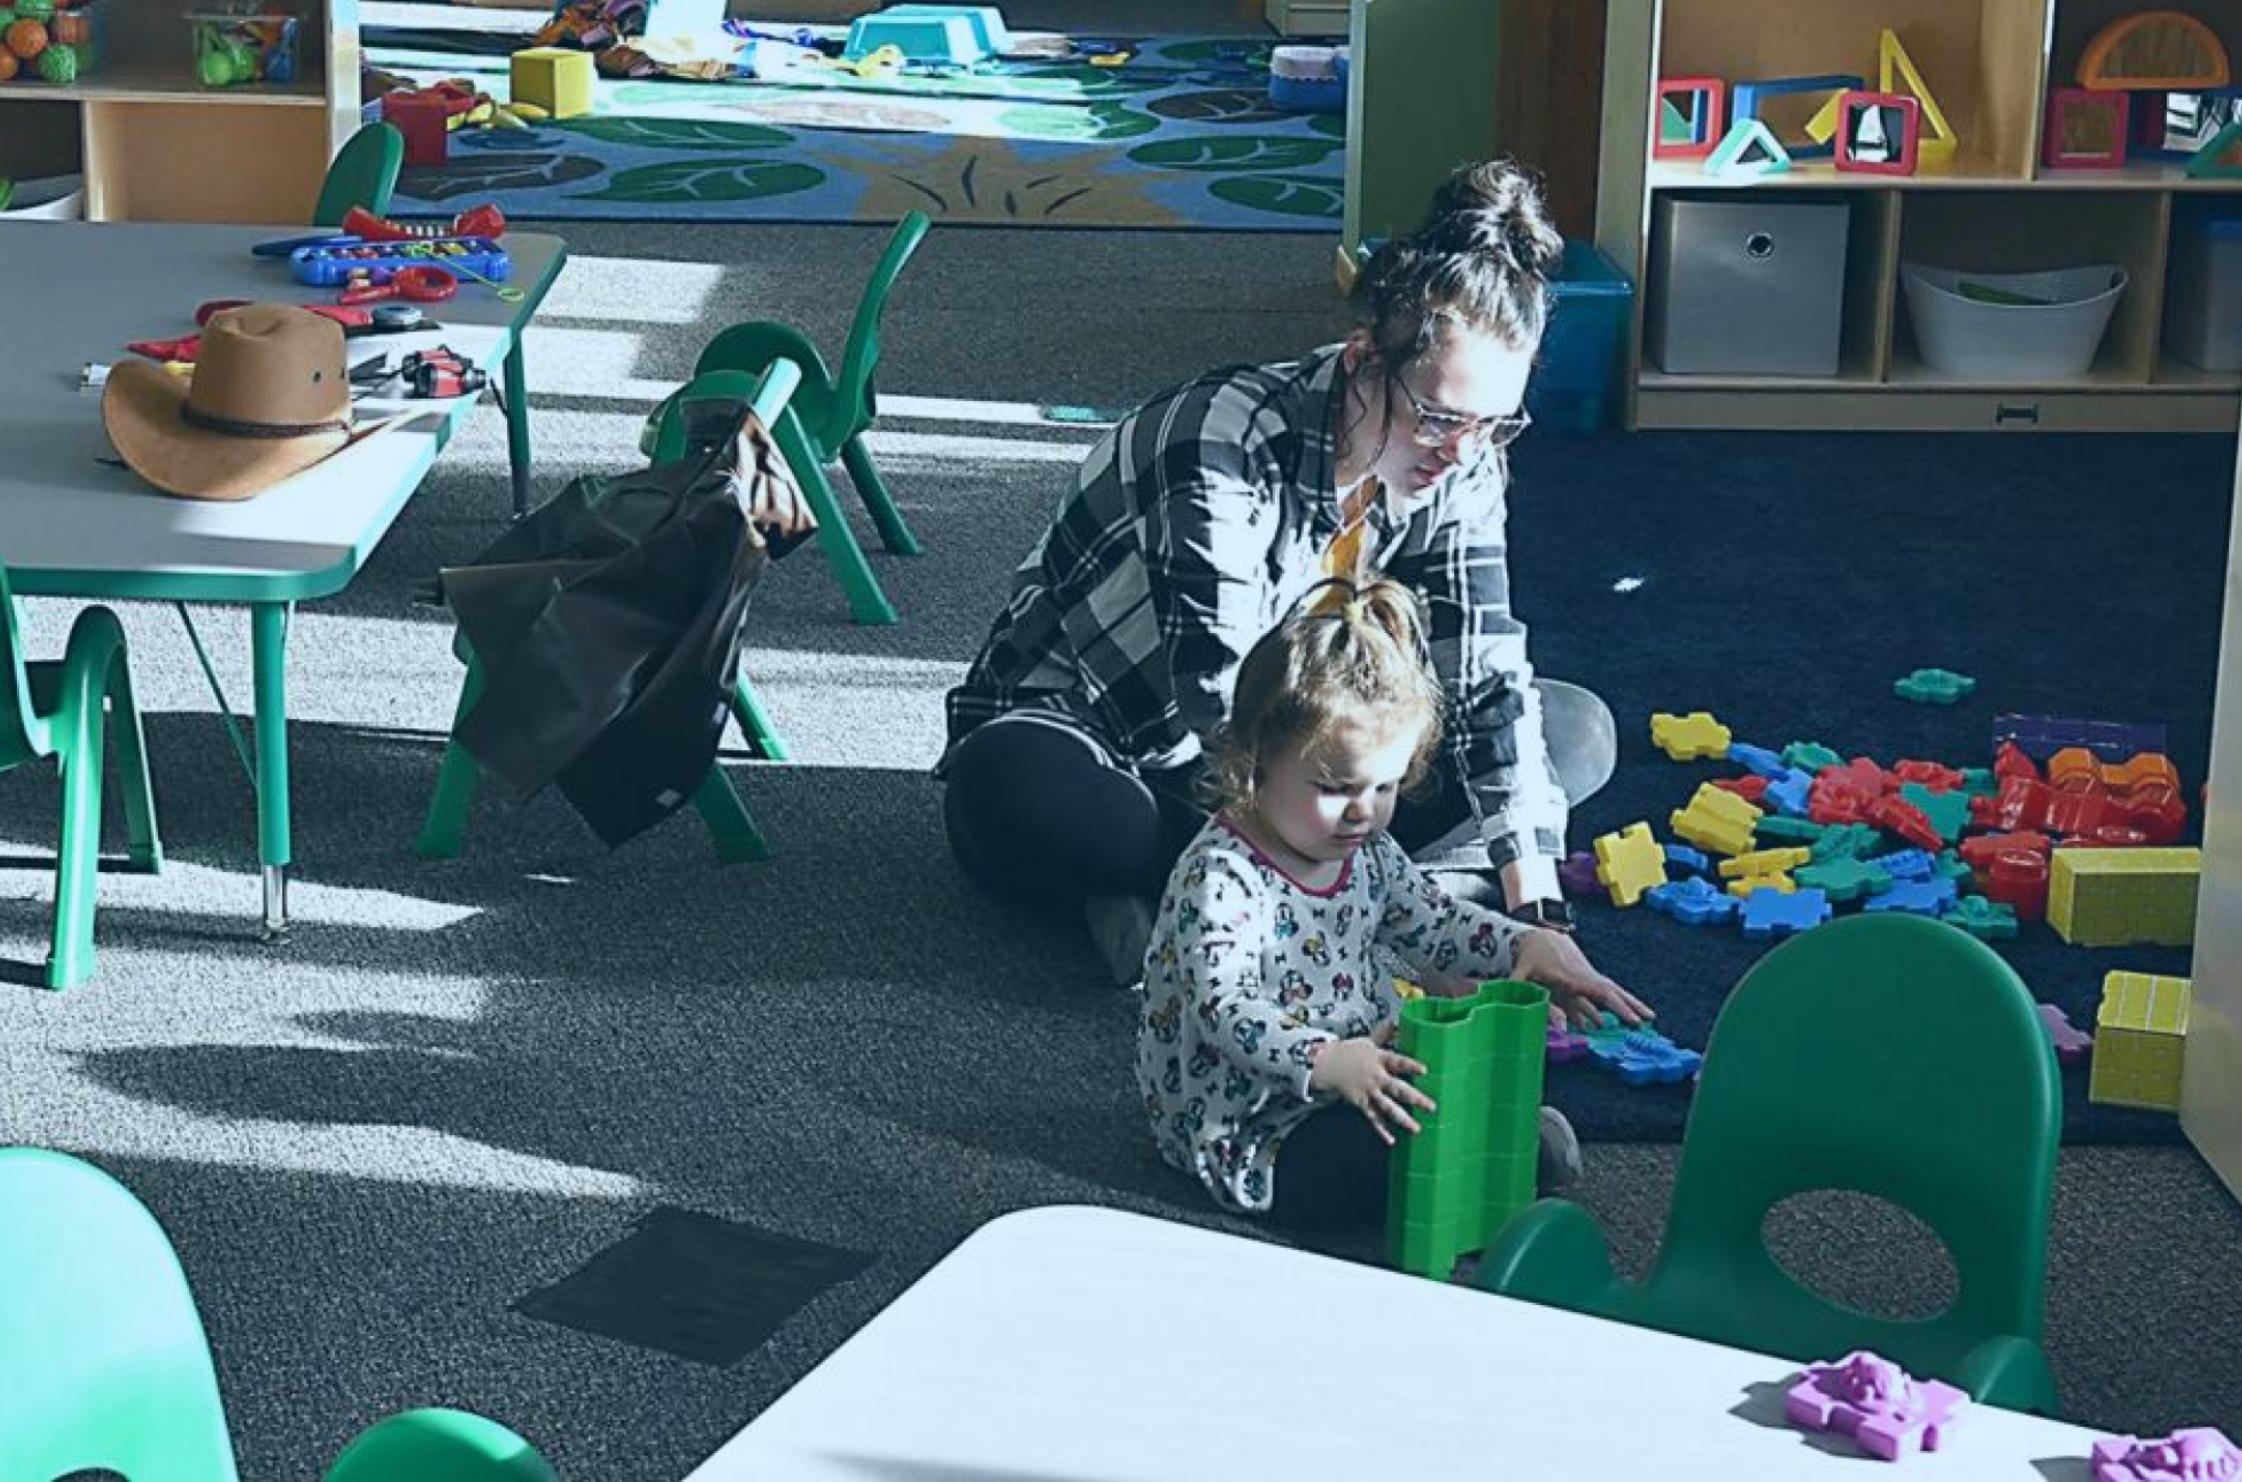 Adult and Child play on the floor in a child care setting